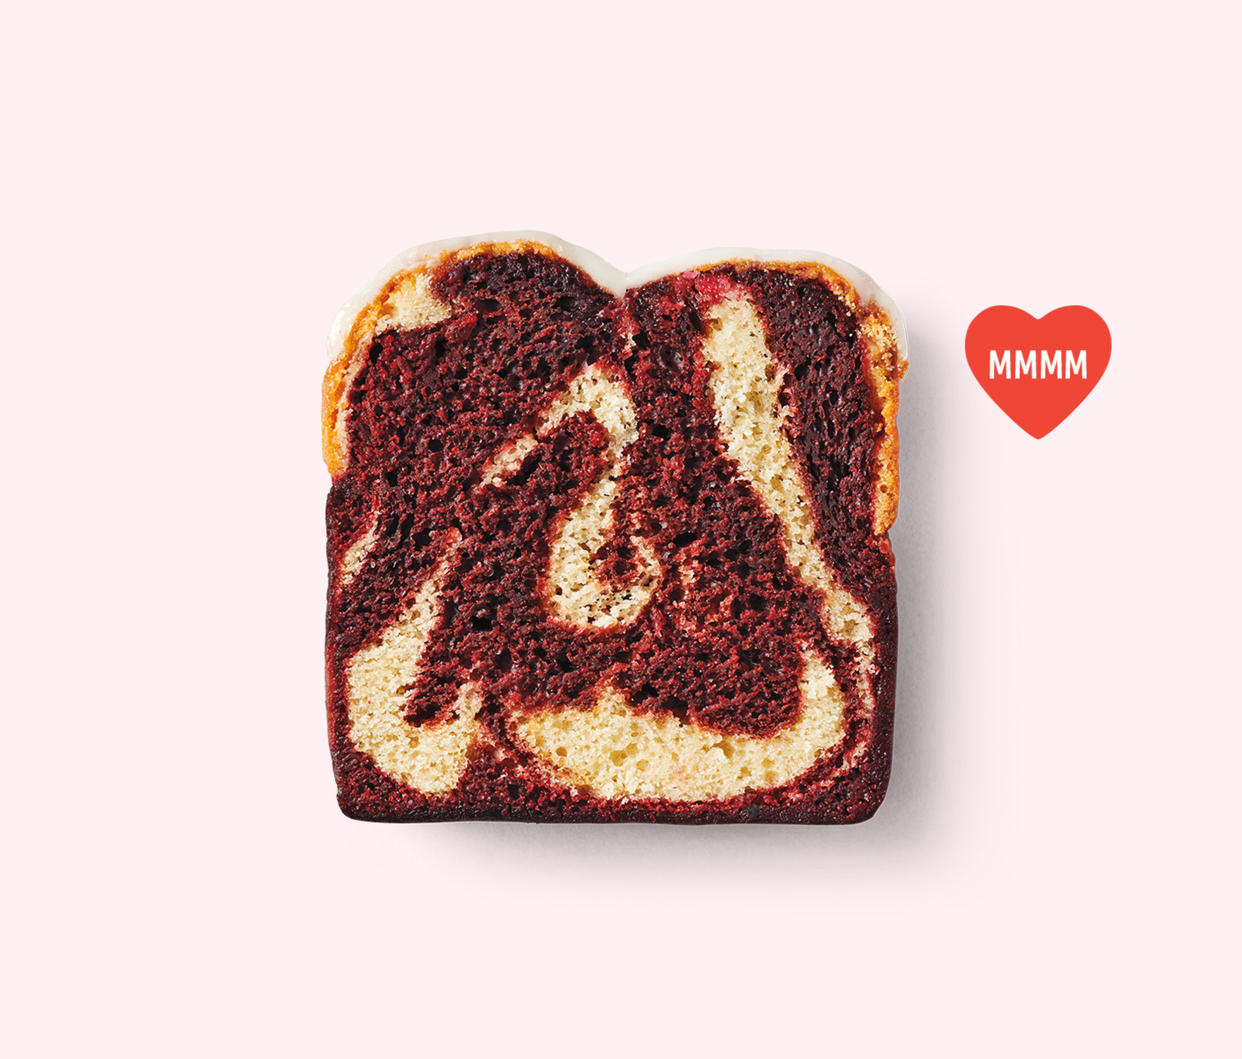 Customers can now snack on a piece of Red Velvet Loaf at participating Starbucks.  (Starbucks)